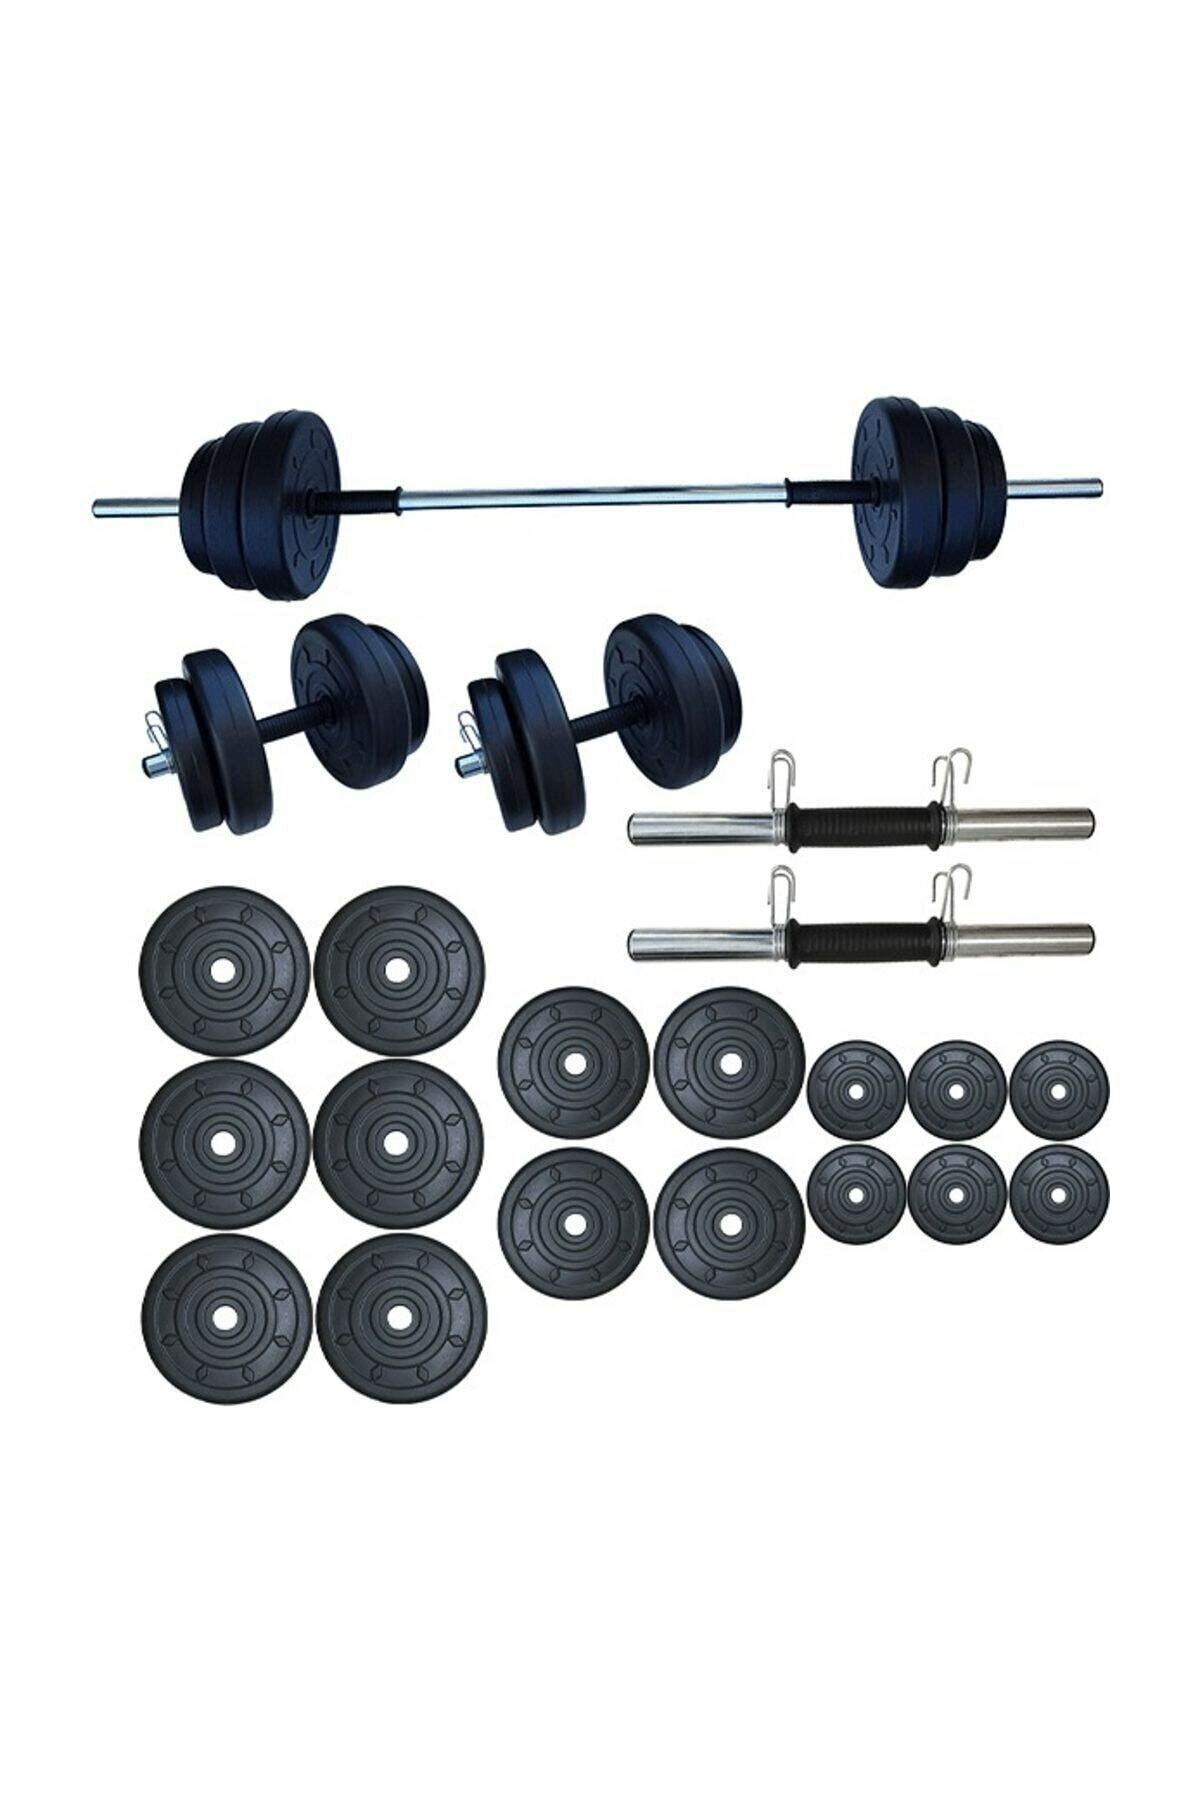 Dumbbell Set 85 KG Dumbbell Set Dumbbell Set Weight And Body Building Tool 85 Kg Dumbell Set